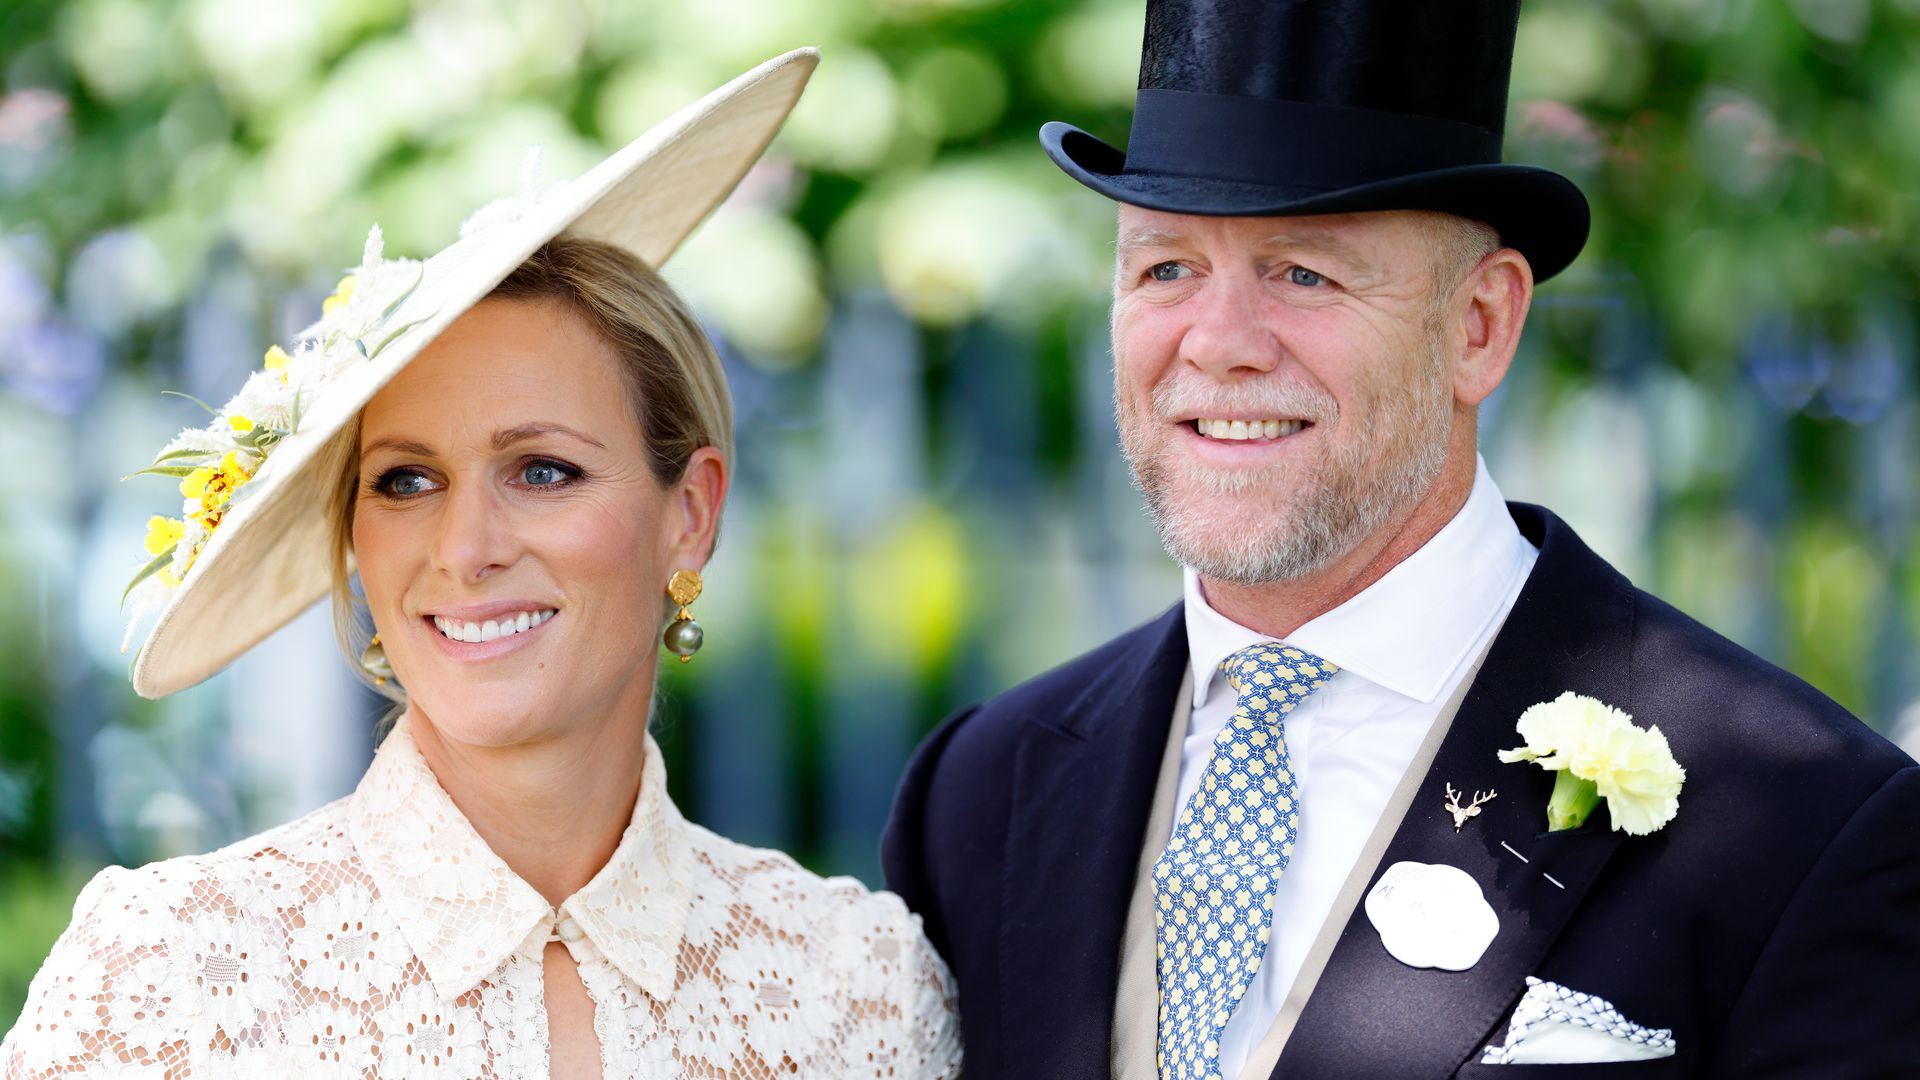 Zara Tindall in white and Mike Tindall in suit and top hat